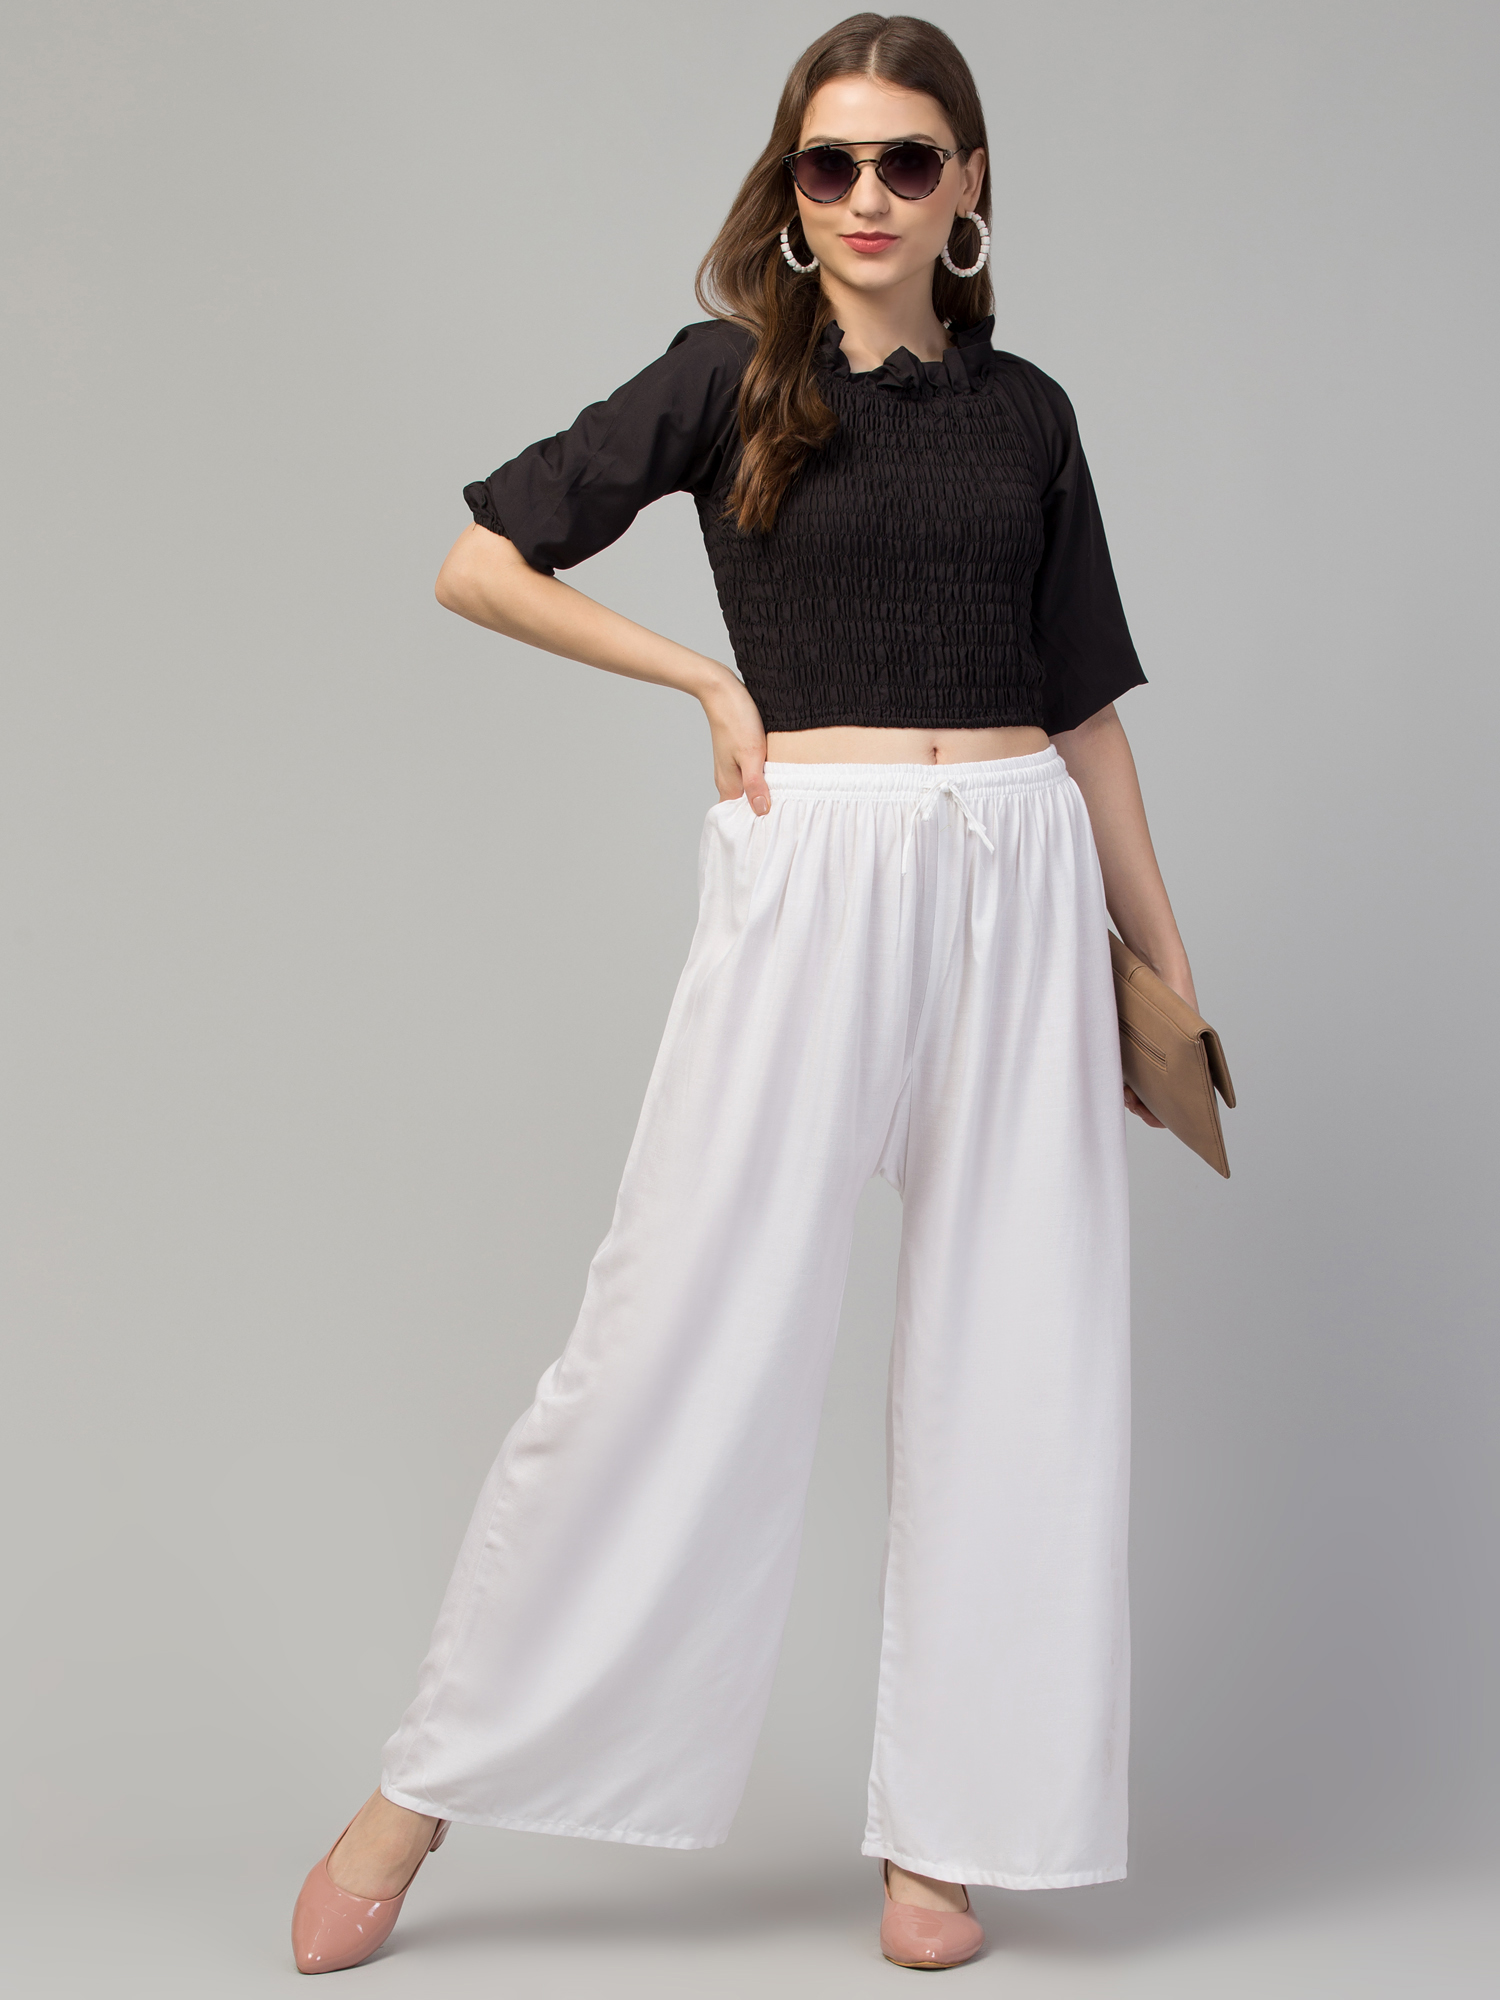 Stlye Me Hip: White Palazzo Pant with Black Long Sleeve Blouse | Spring  Street Outfits | Style, Fashion, Trendy fashion